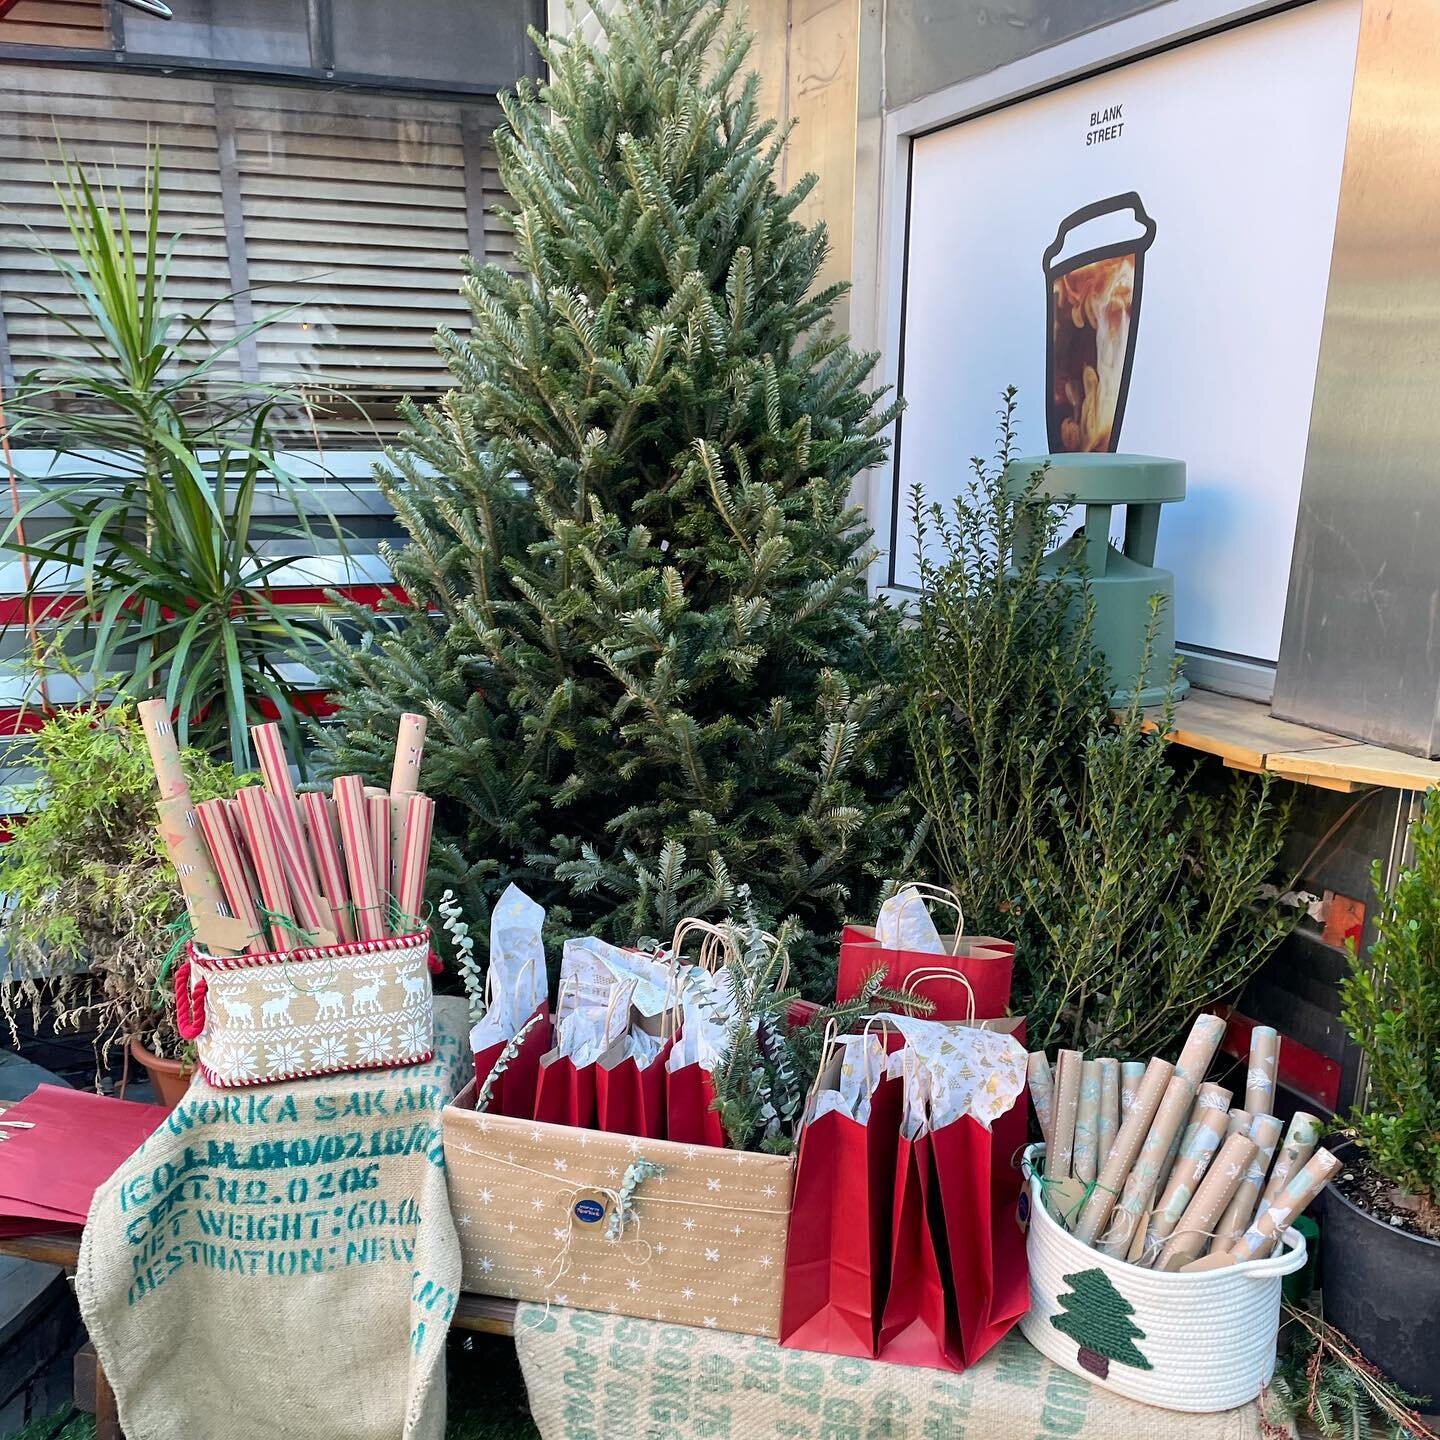 We&rsquo;re celebrating small biz in the neighborhood today with a festive outdoor market from 10am-3pm @blankstreetcoffee. Shop and support local business and get free gift wrapping. #shopwithny

#shoplocal #williamsburg #smallbiz #holidaygifts #wom